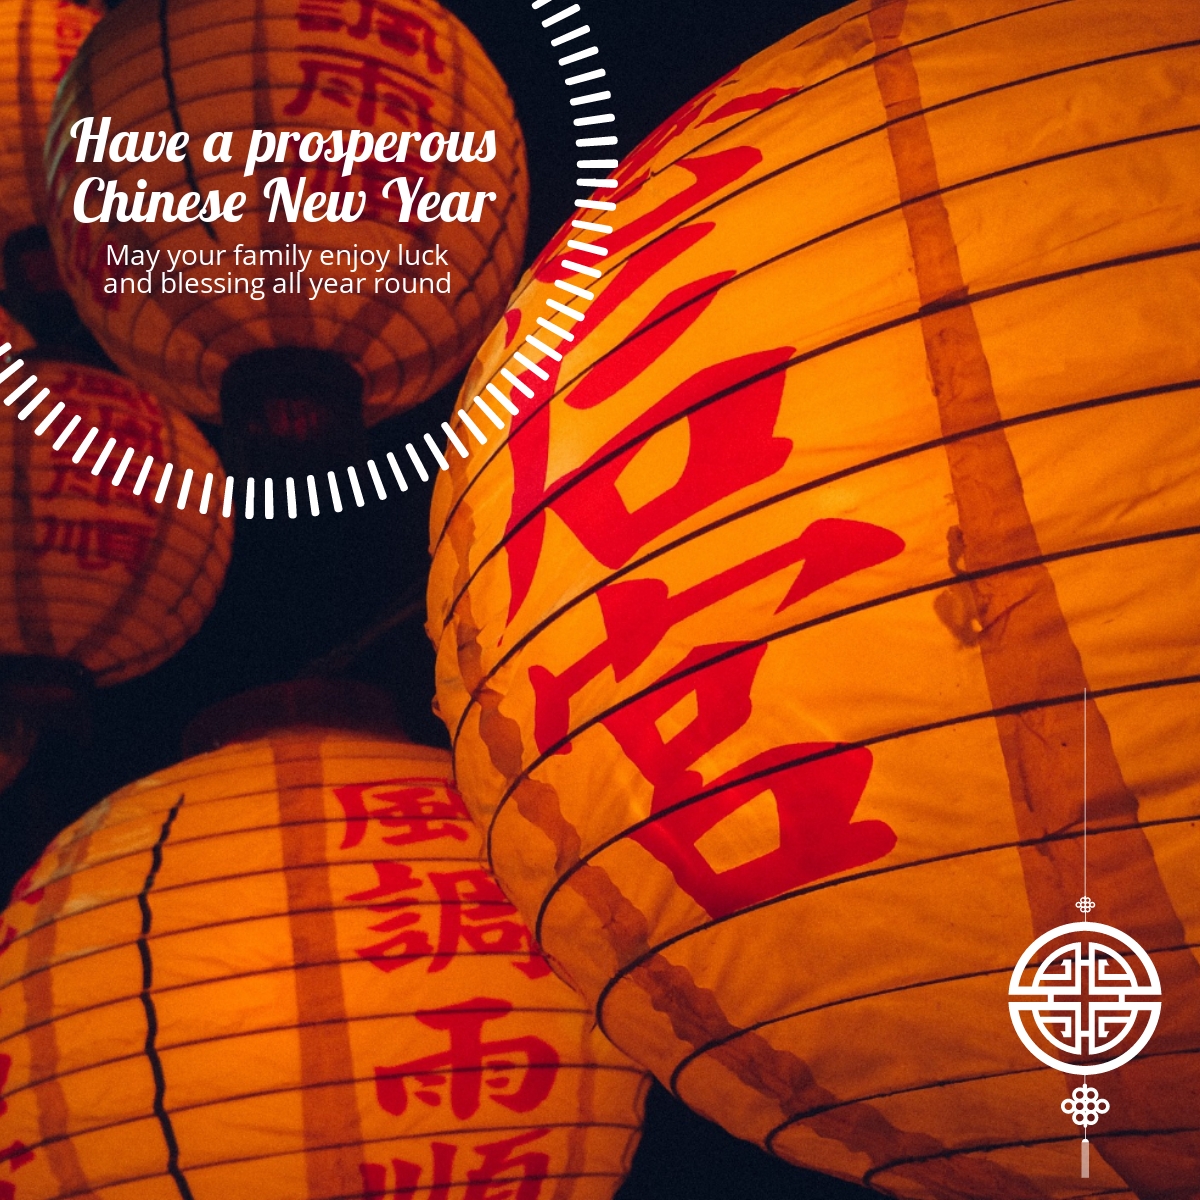 Chinese New Year Event Linkedin Post Template.jpe